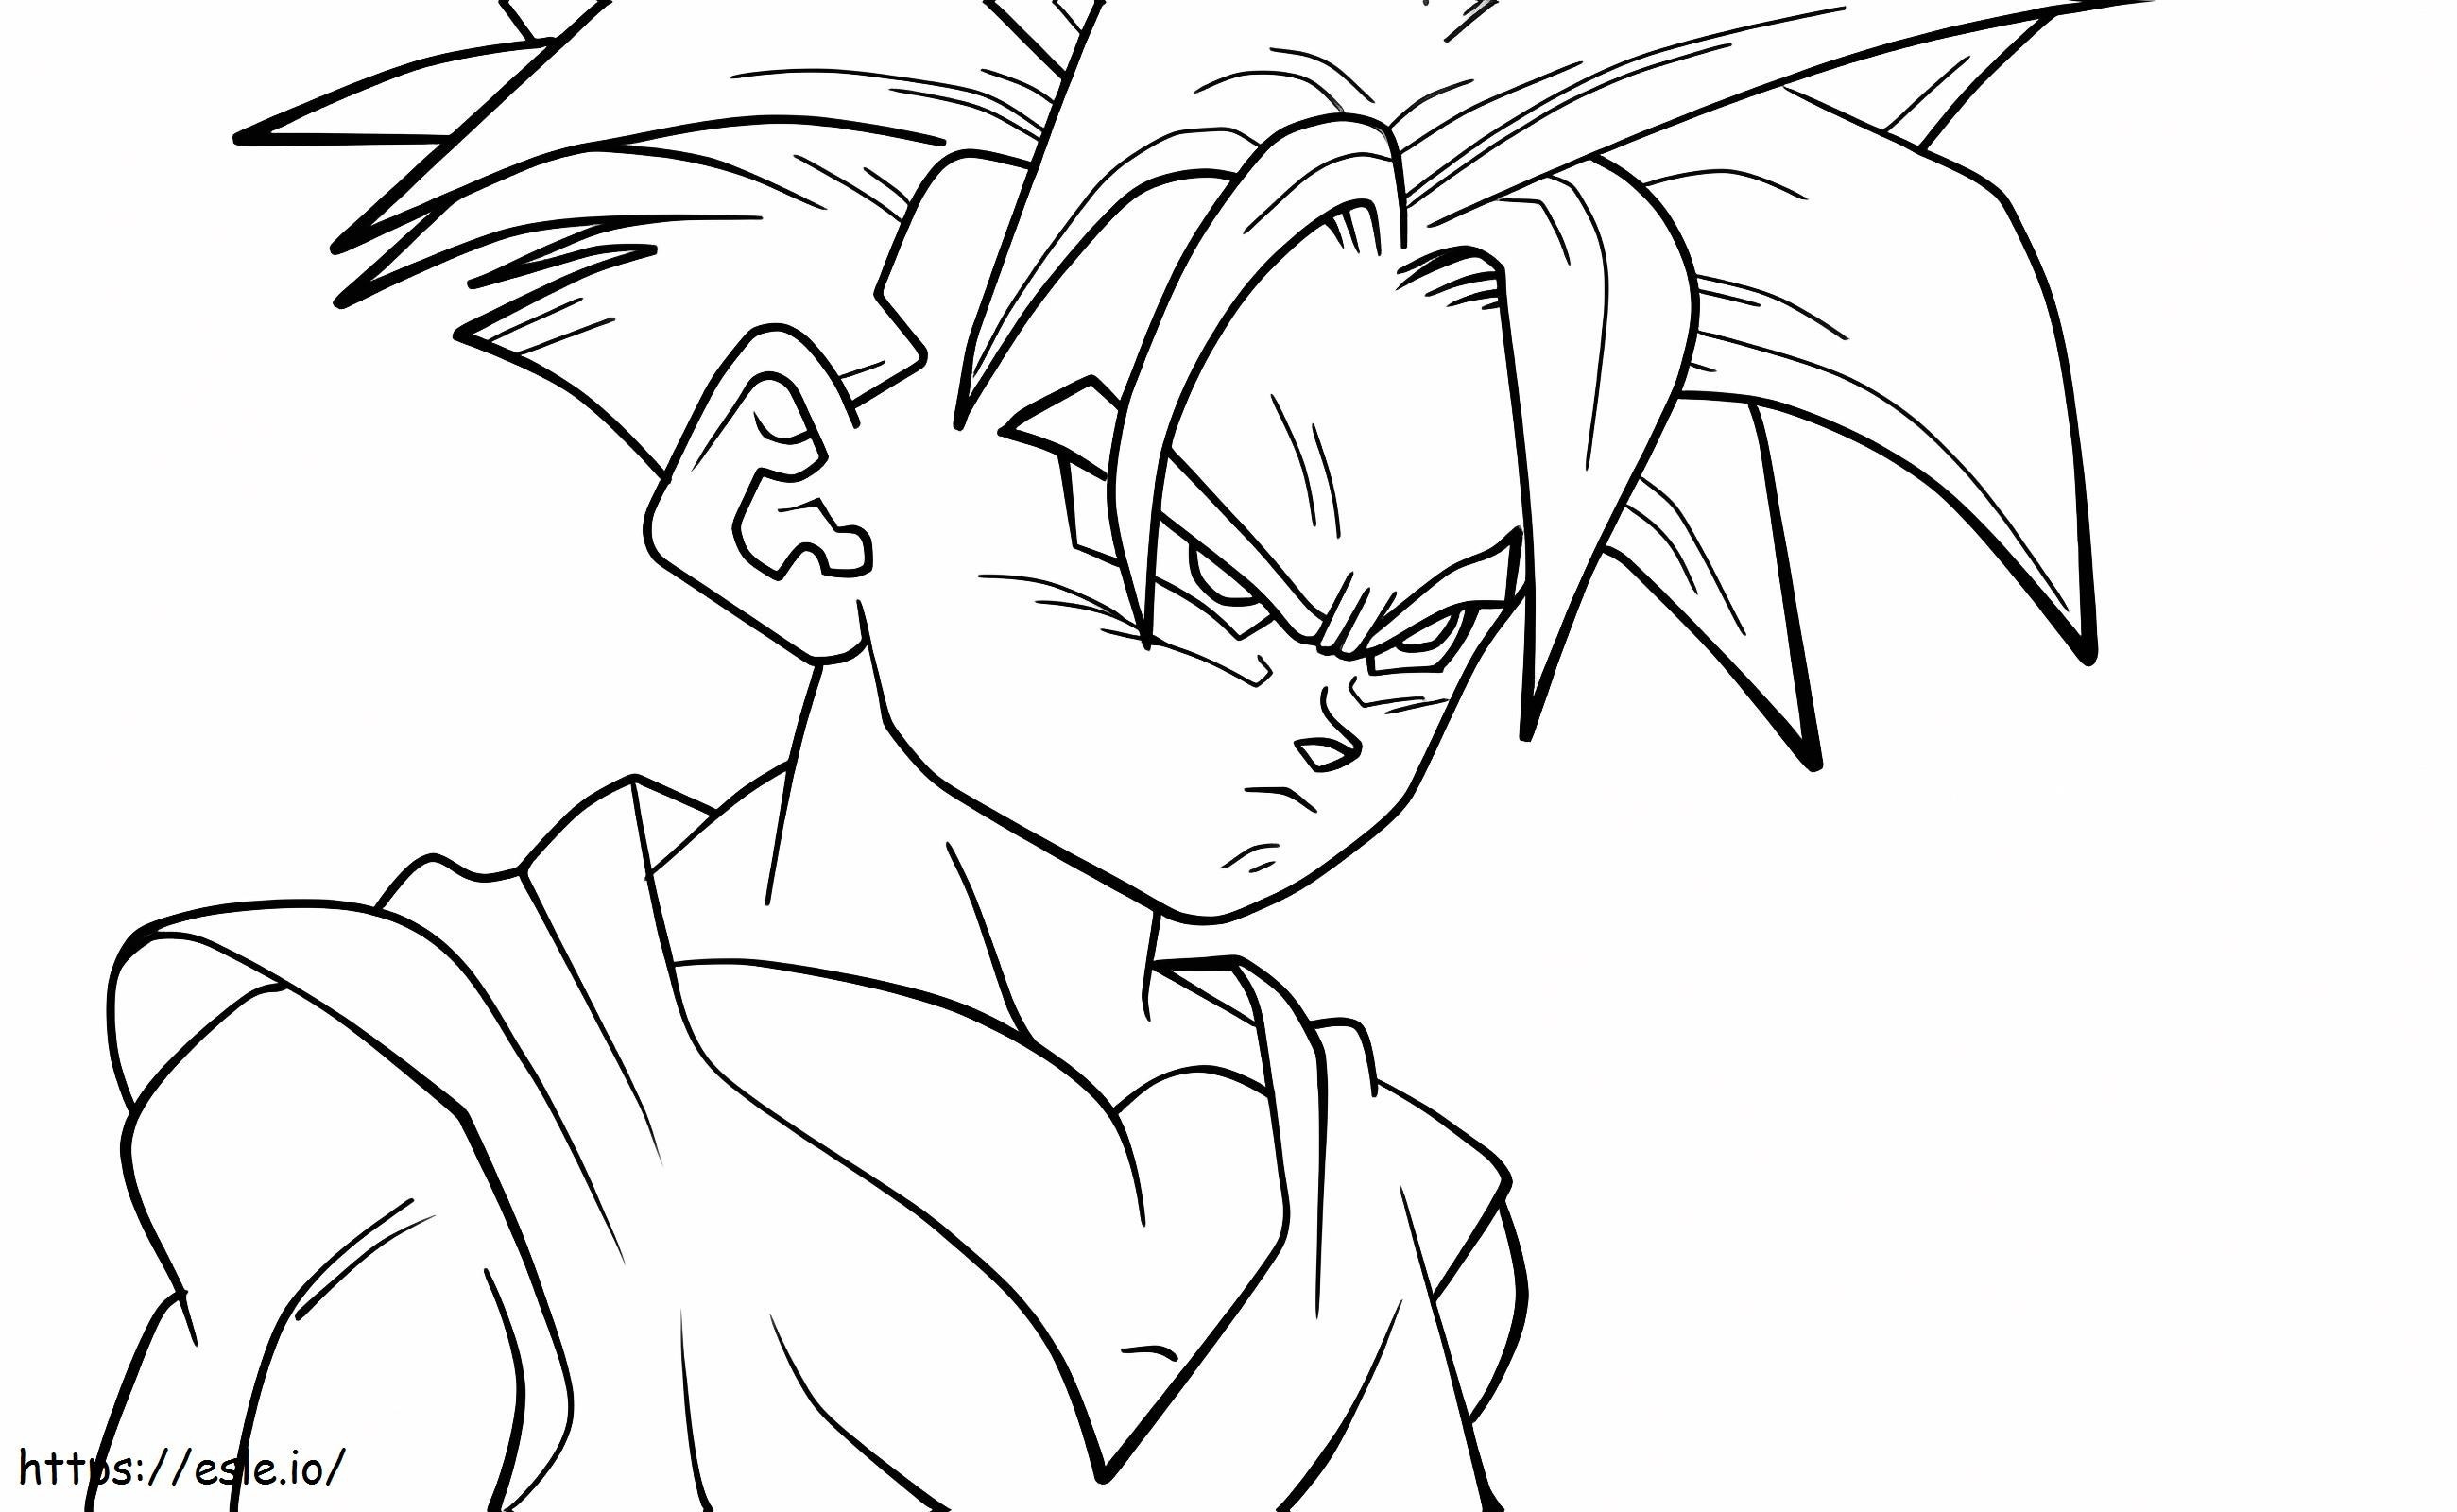 Gohan Head coloring page